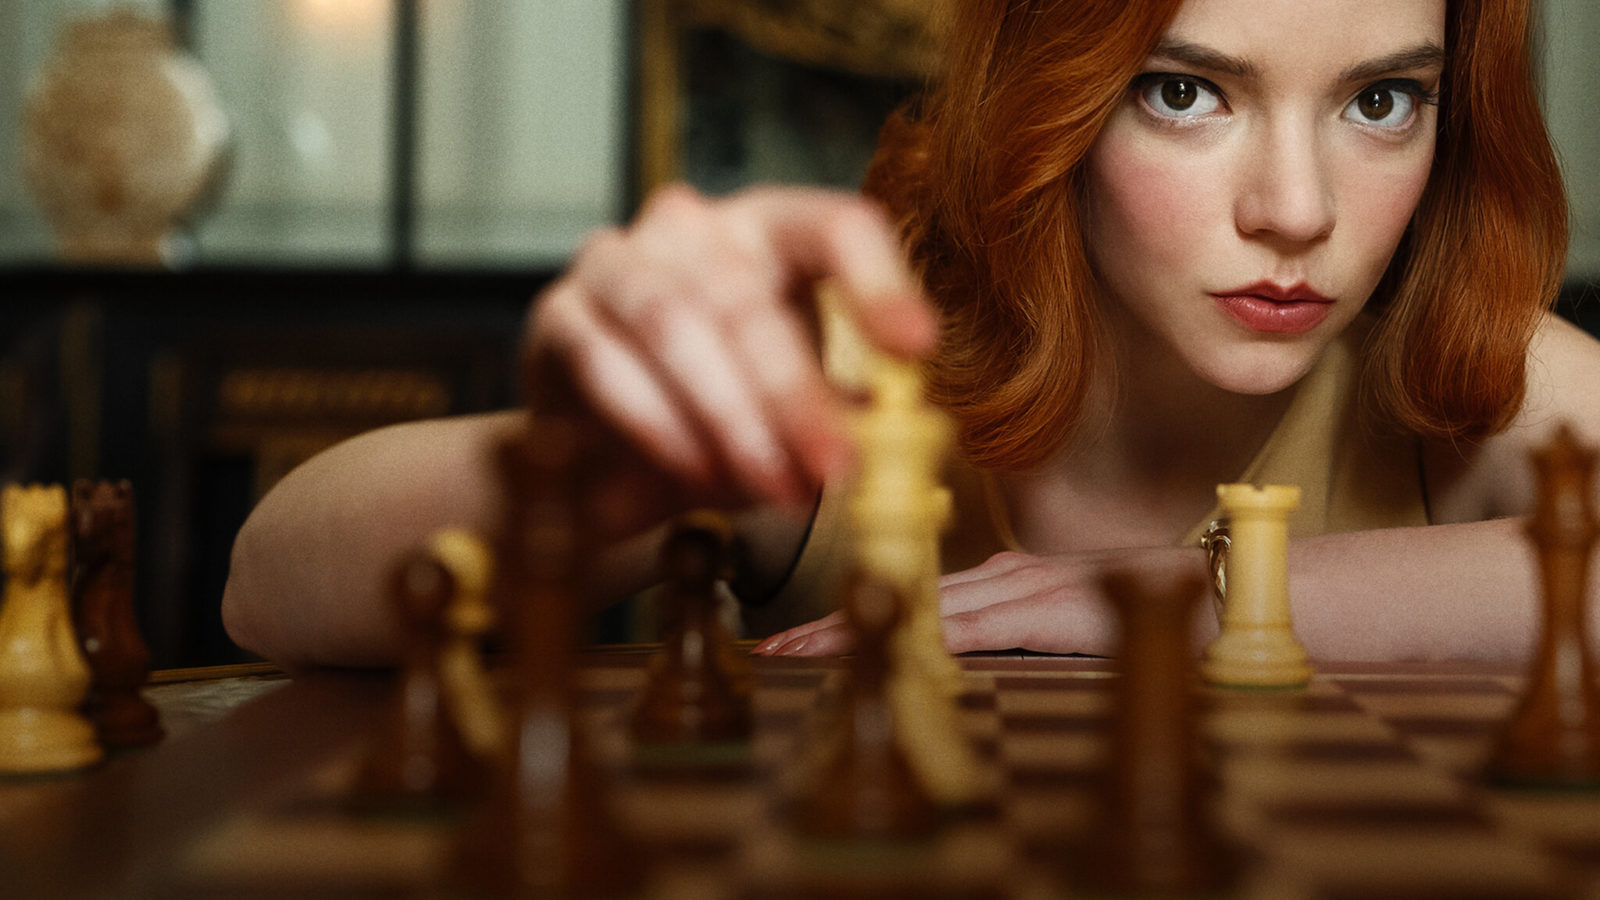 Is Beth Harmon From 'The Queen's Gambit' Based On A Real Person?